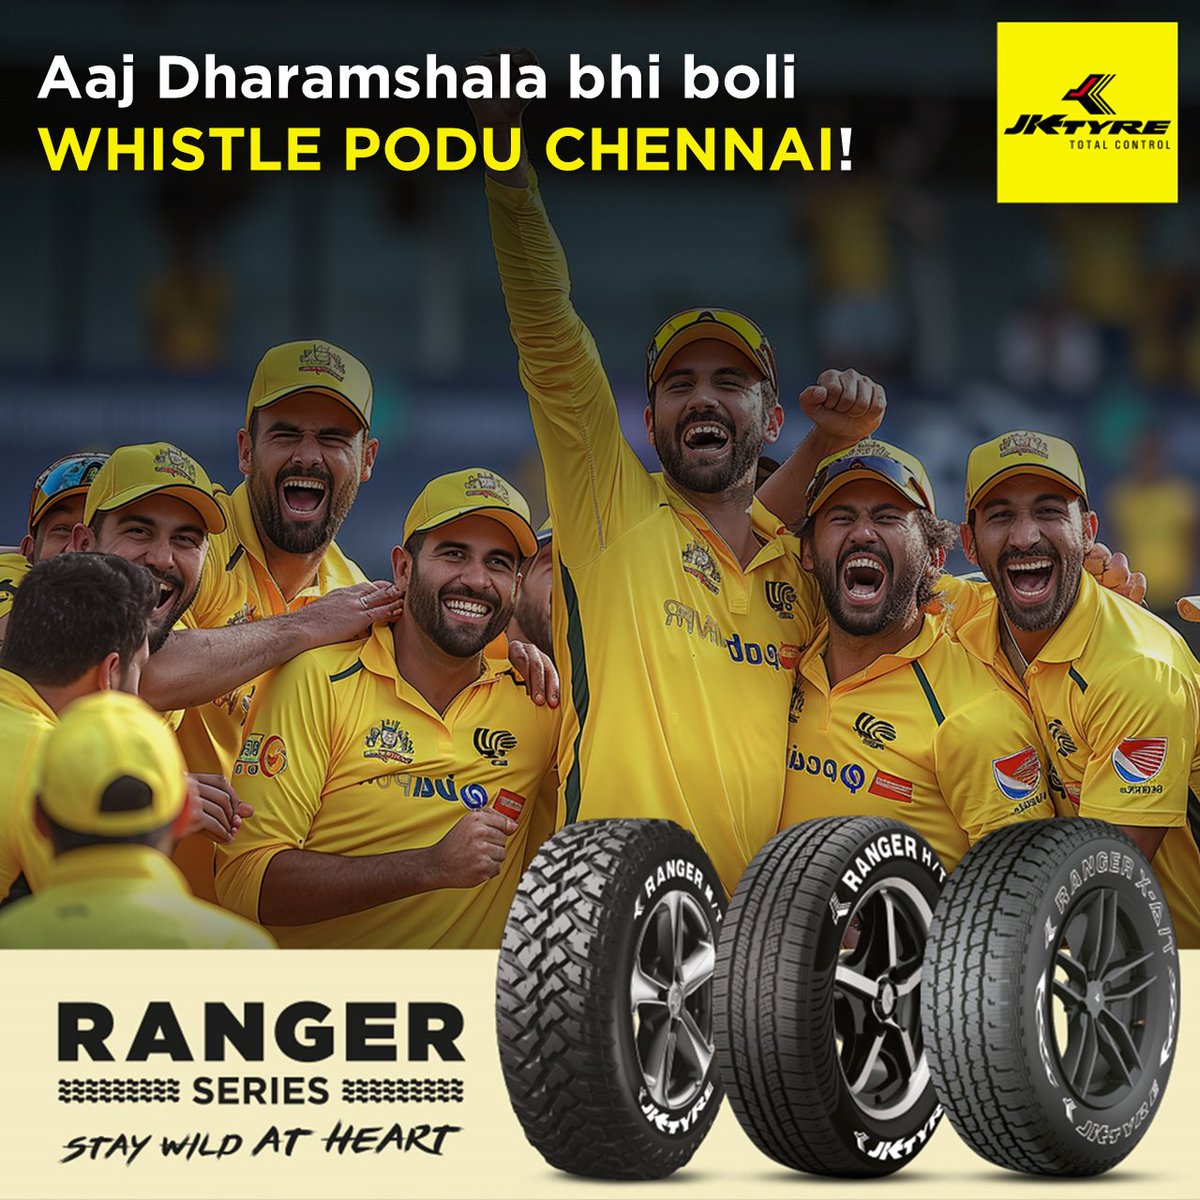 That magnificent comeback by the Yellow Army was as wild as a ride with our Ranger series tyre.

Check out the #RangerSeries from JK Tyre, built for adventures, and multiple terrains, for those who are ‘Wild at Heart’.

#JKTyre #IndianT20League #Chennai #Punjab